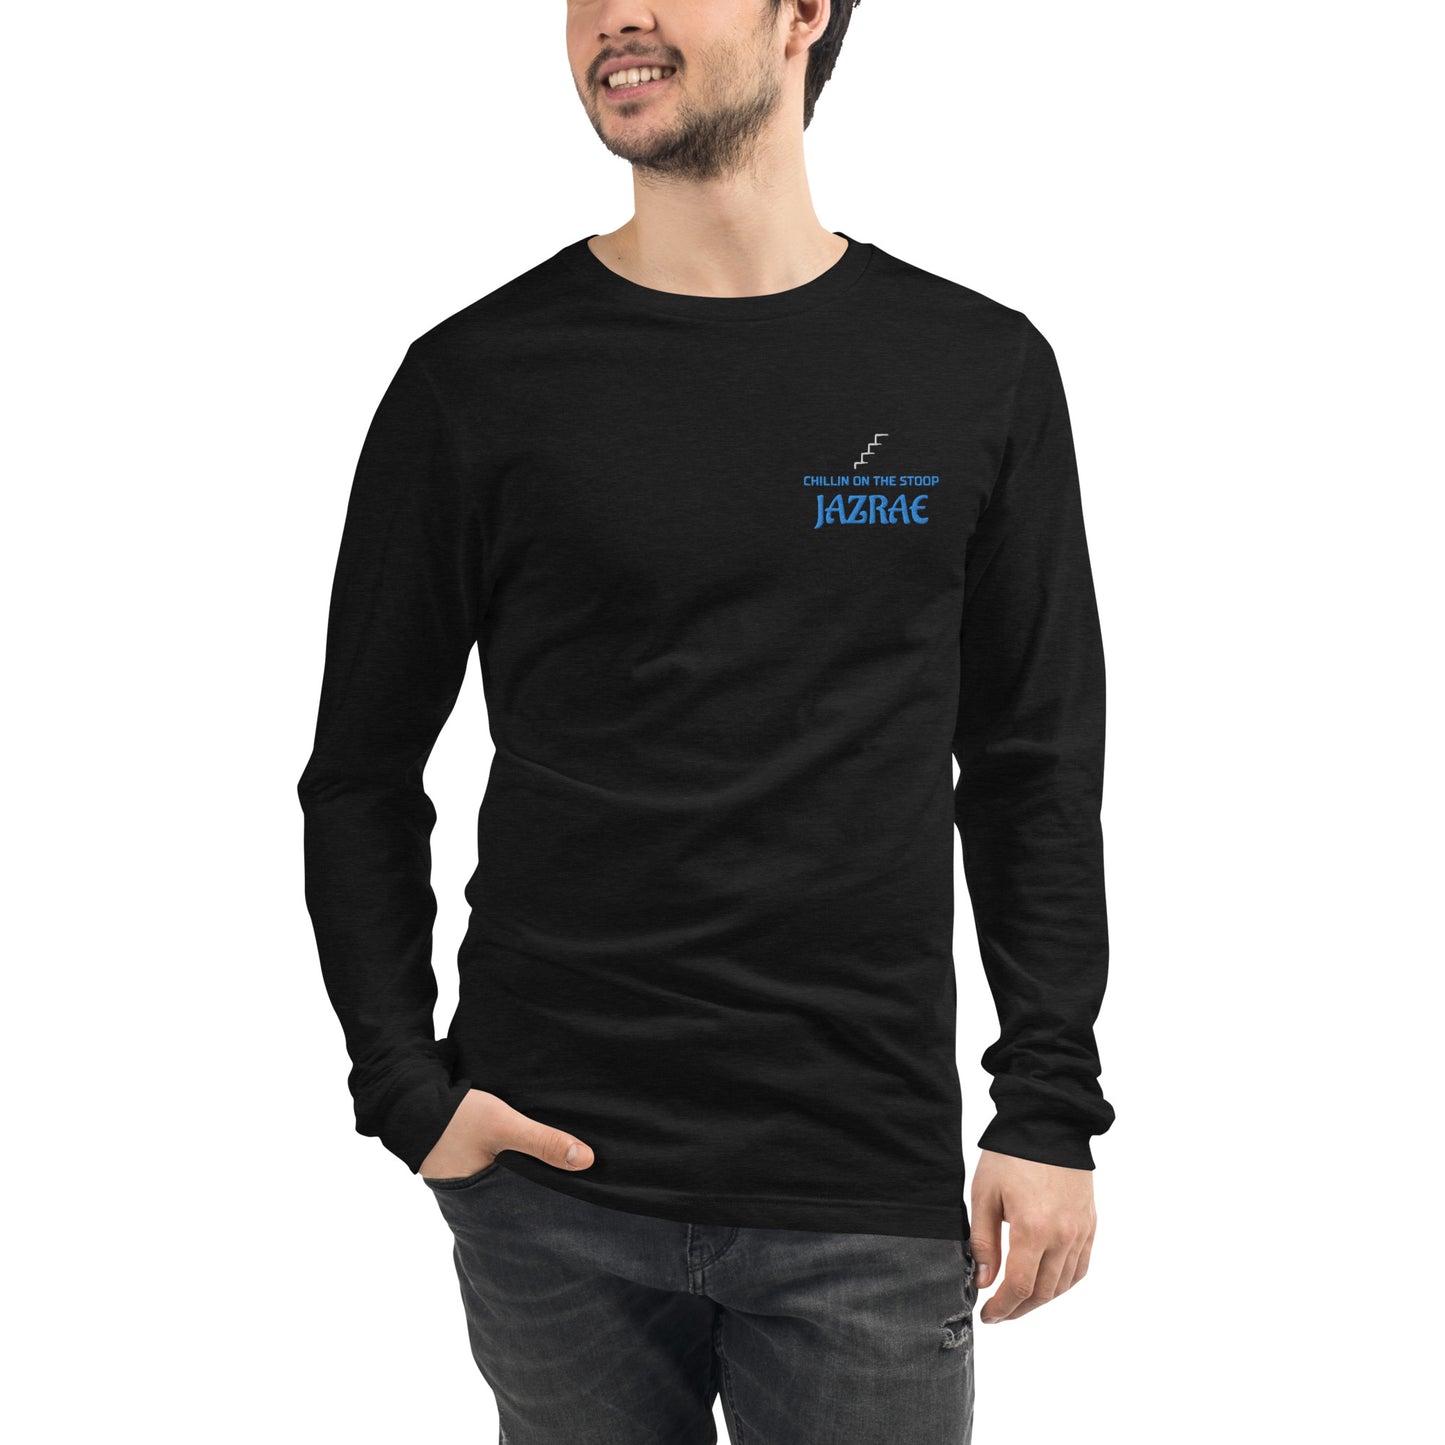 CHILLIN ON THE STOOP Stitched Unisex Long Sleeve Tee